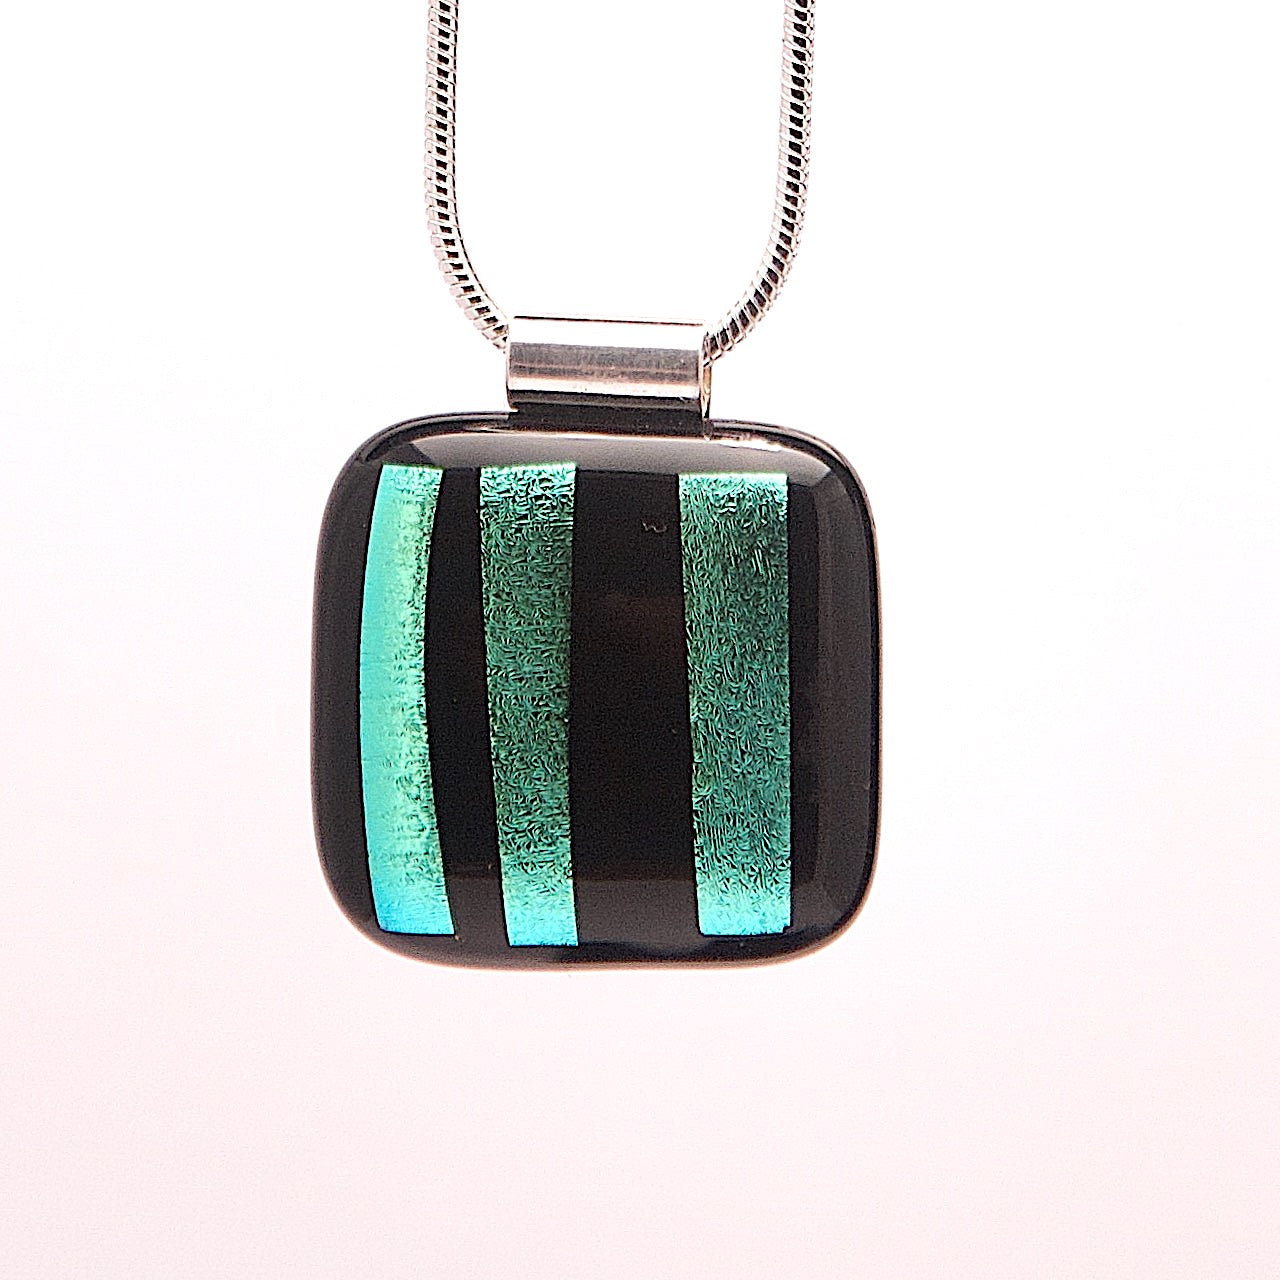 Black glass pendant with gold stripes